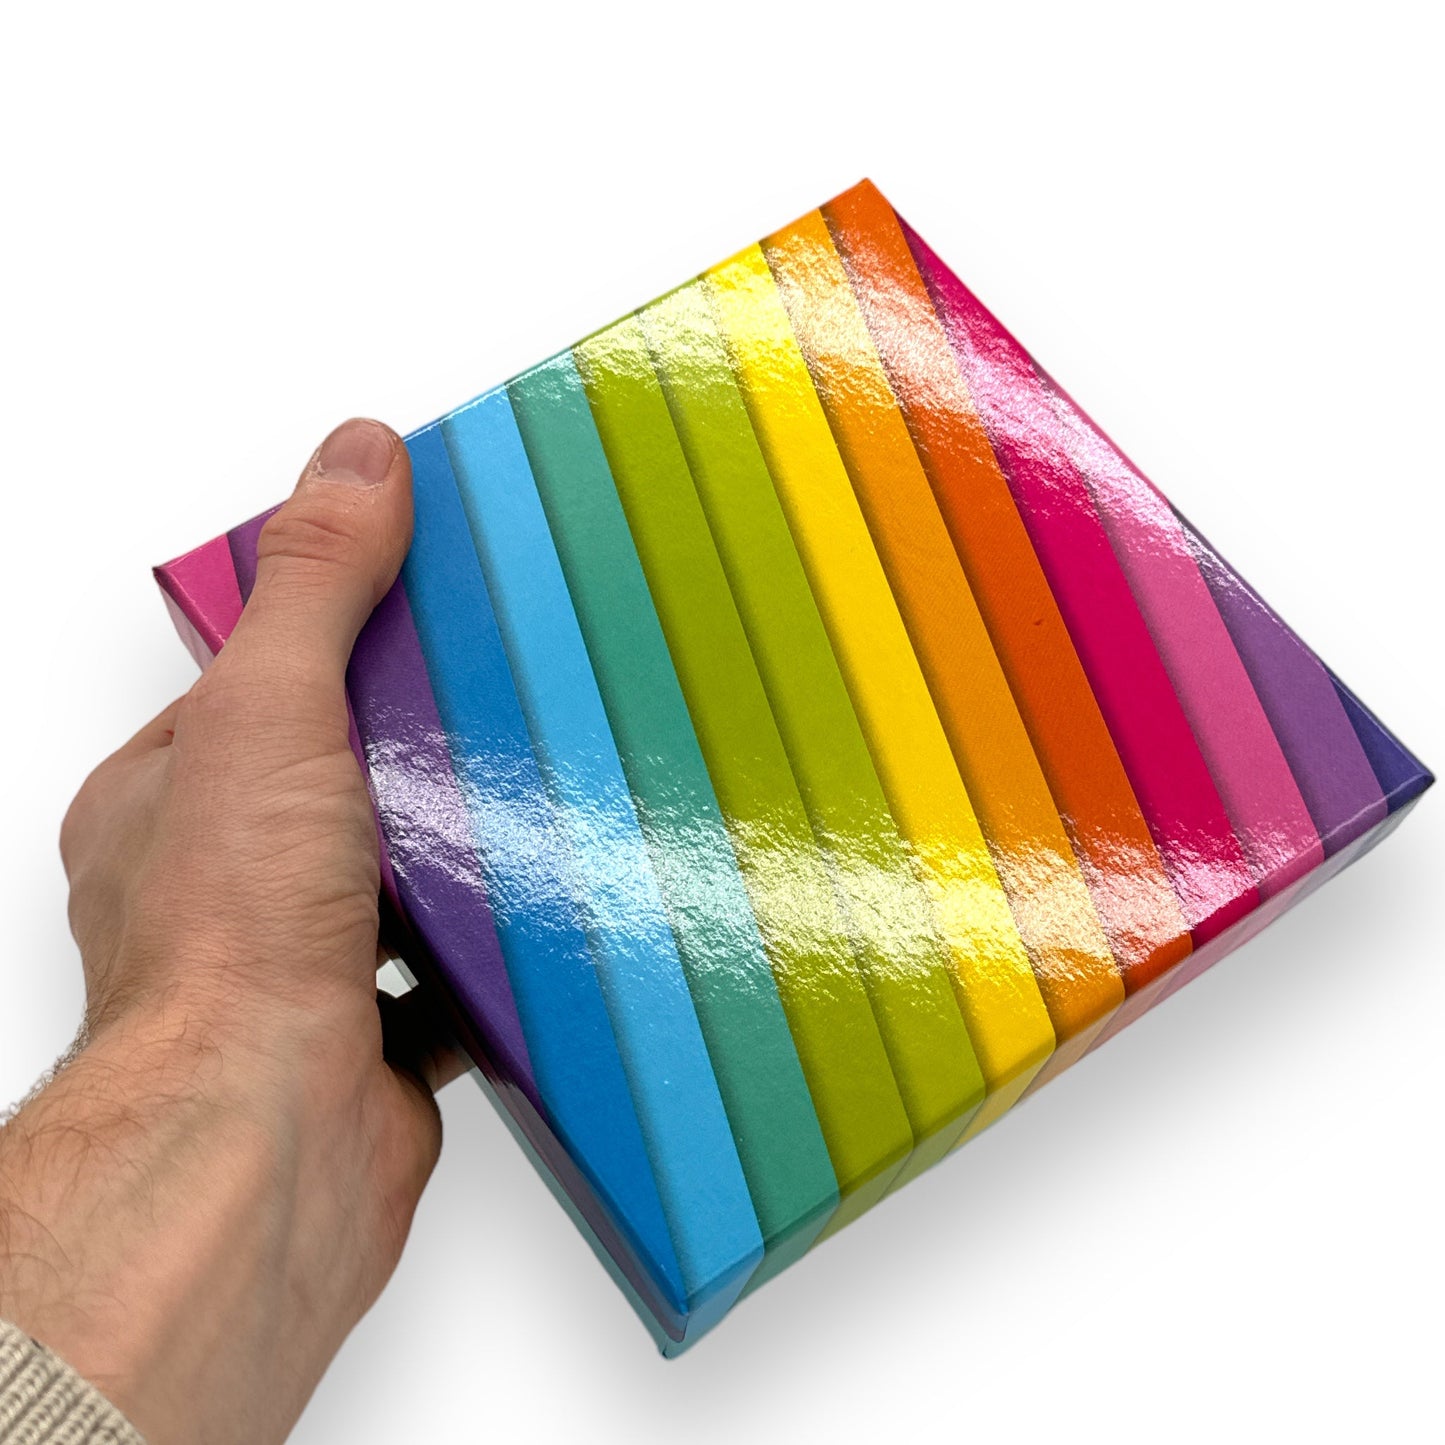 Rainbow Cardboard Box - 14x5.8 cm - Add Color and Style to Your Storage Space